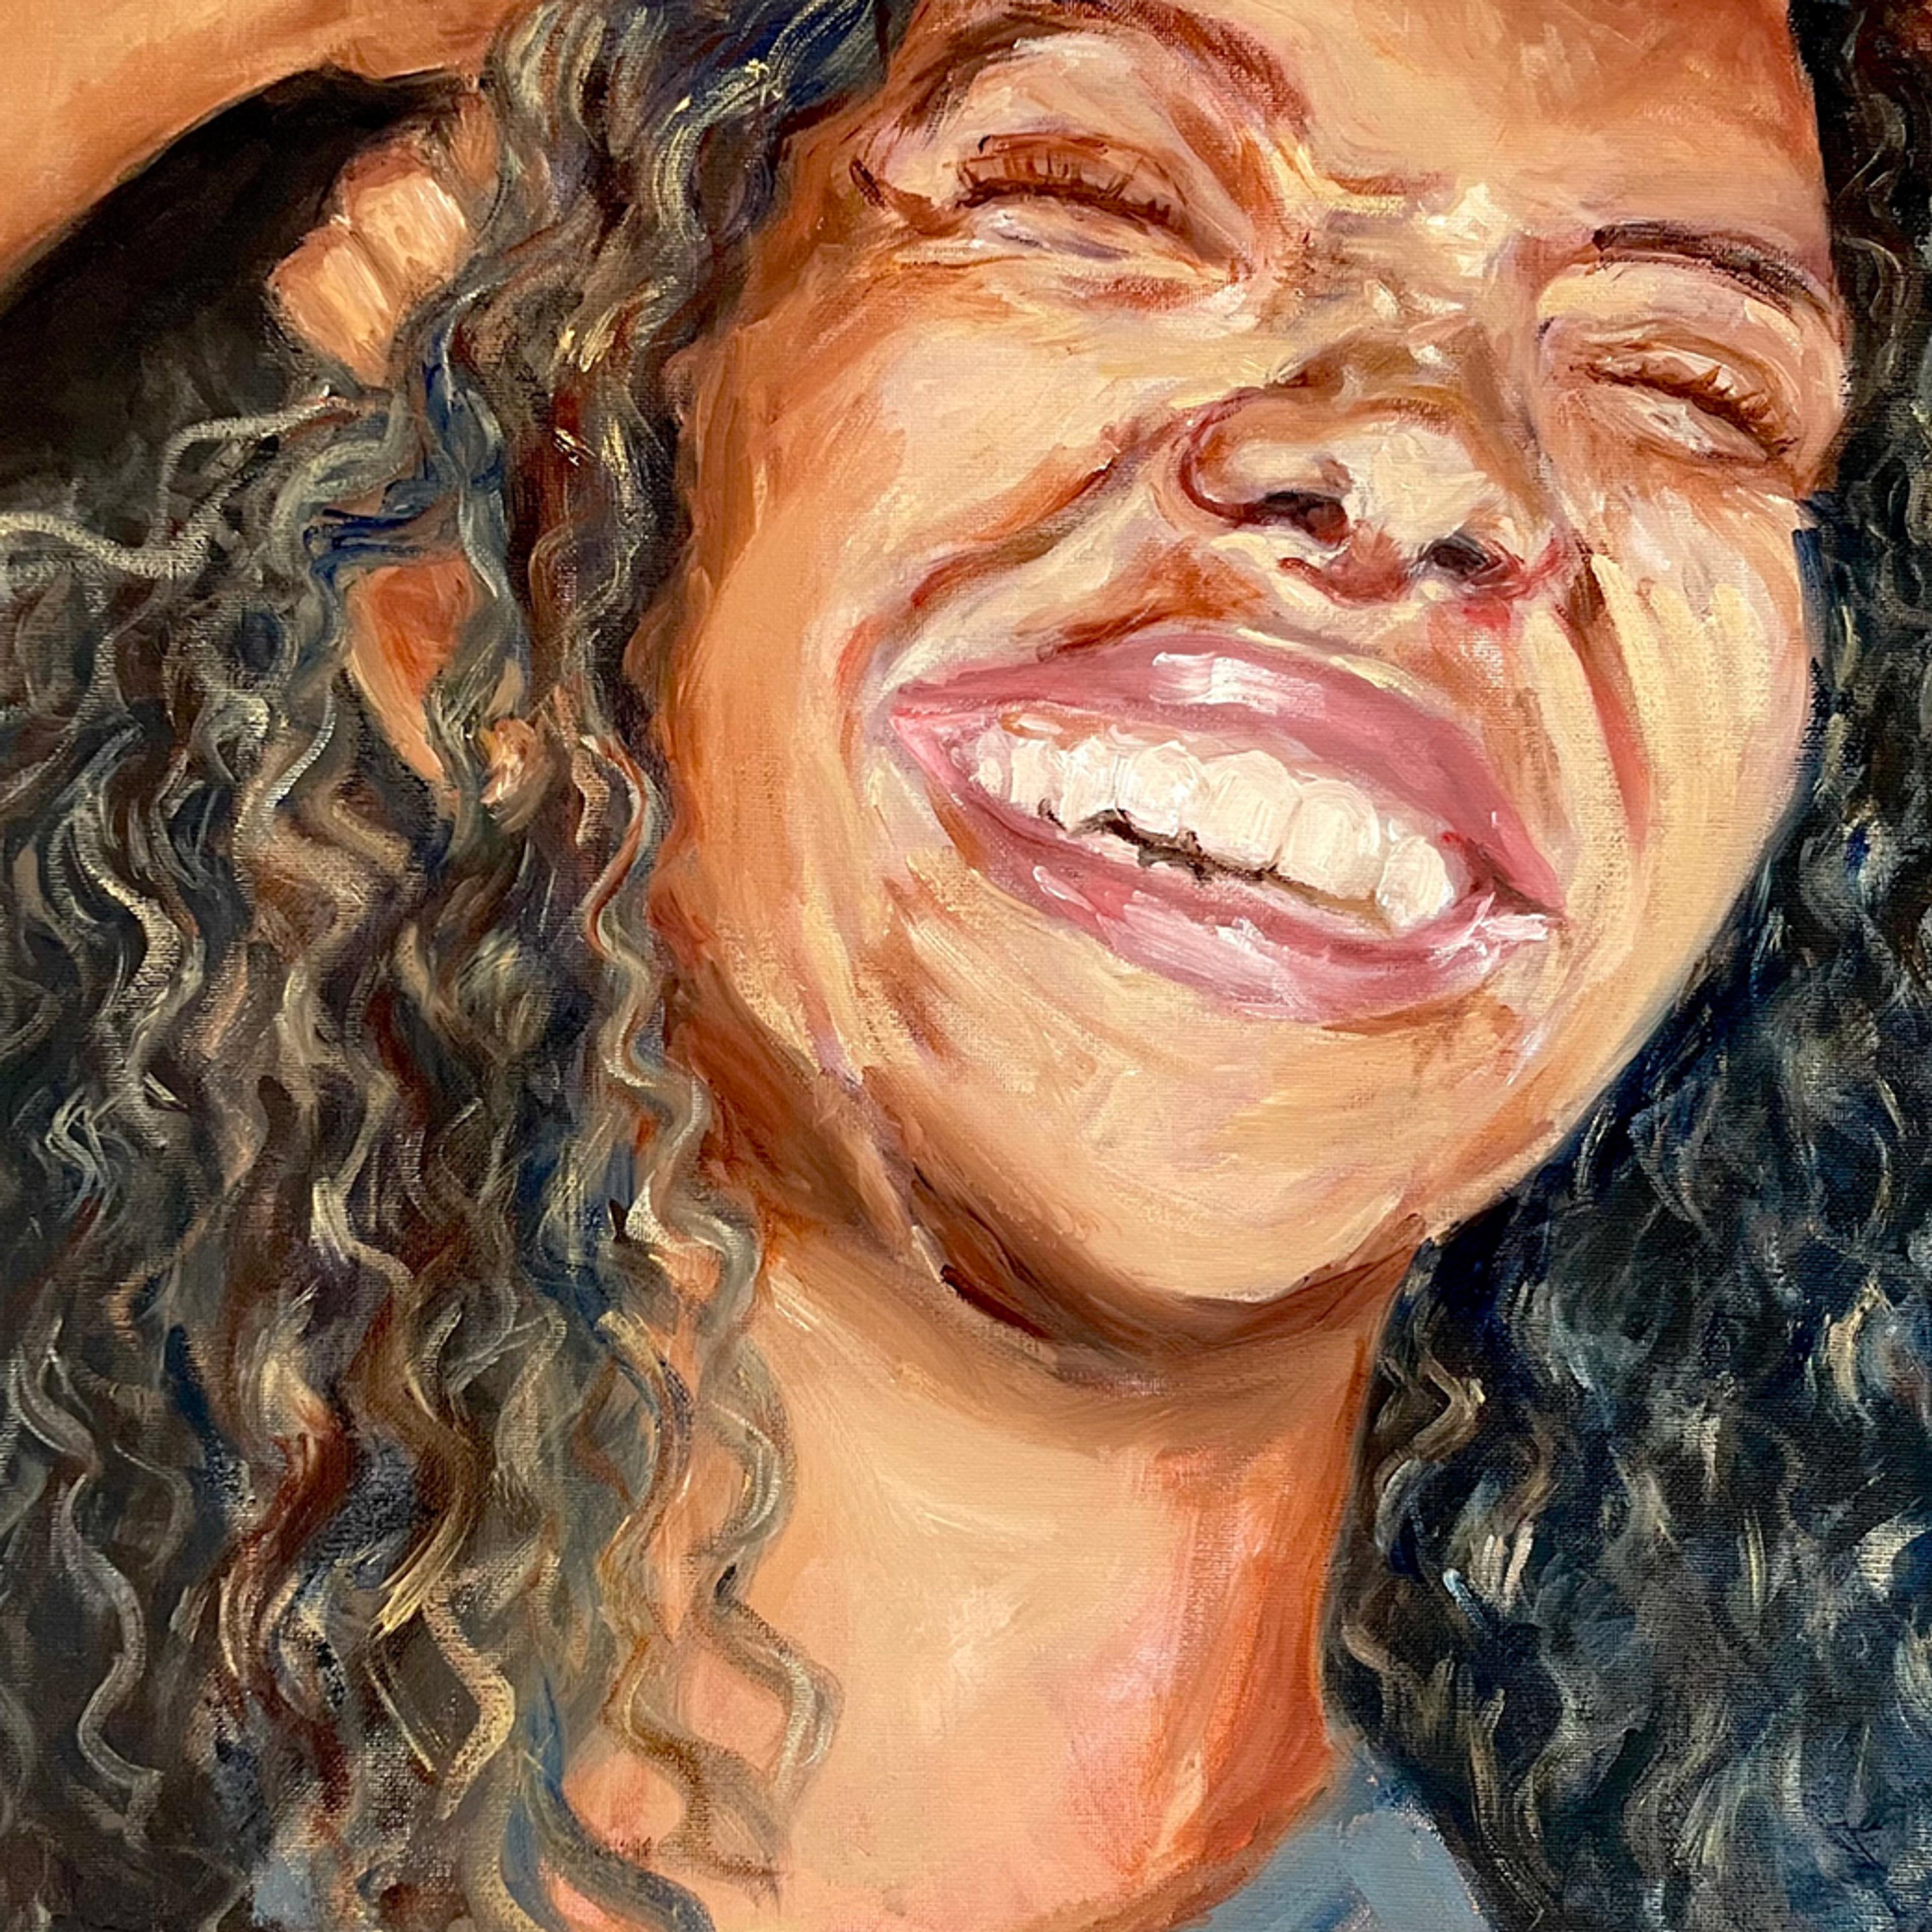 A close crop painting of woman with tan skin, dark curly hair, and closed eyes as she smiles with her teeth